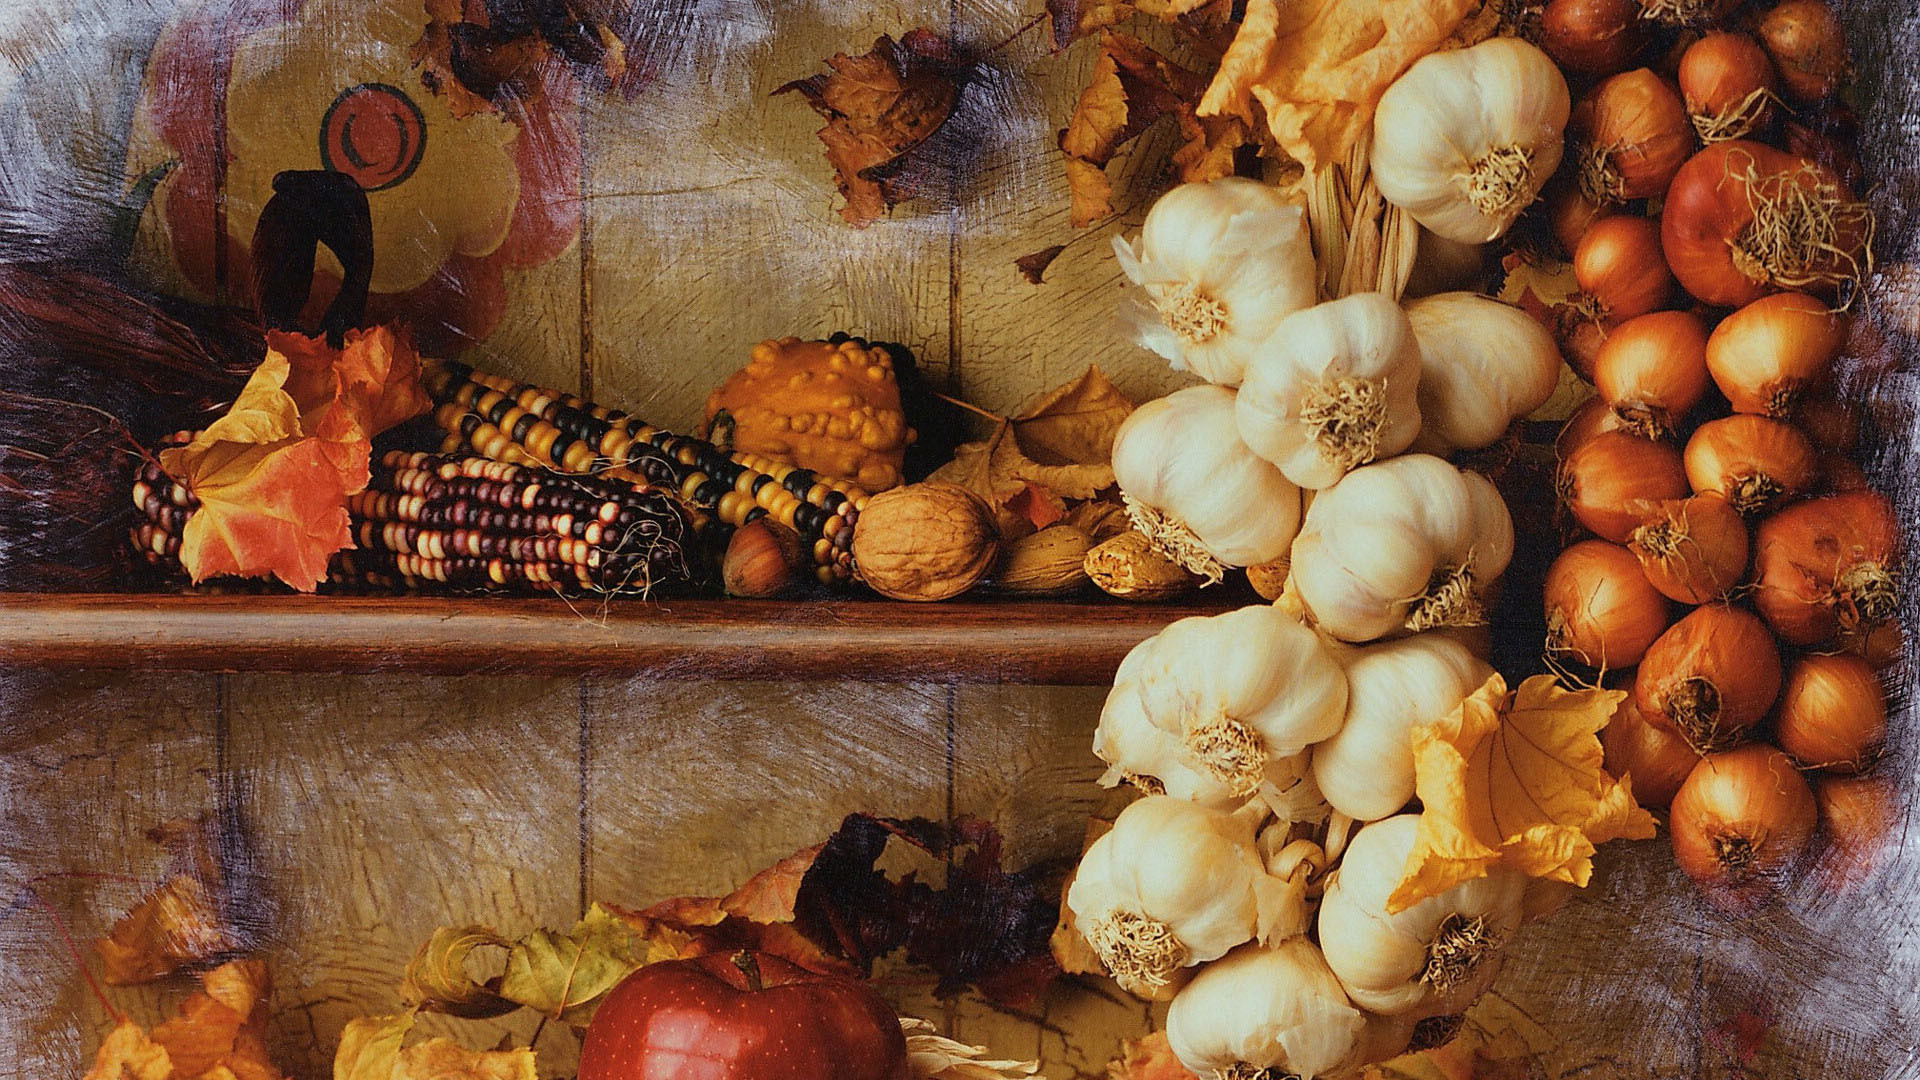 1920x1080 Autumn Harvest wallpapers and stock photos